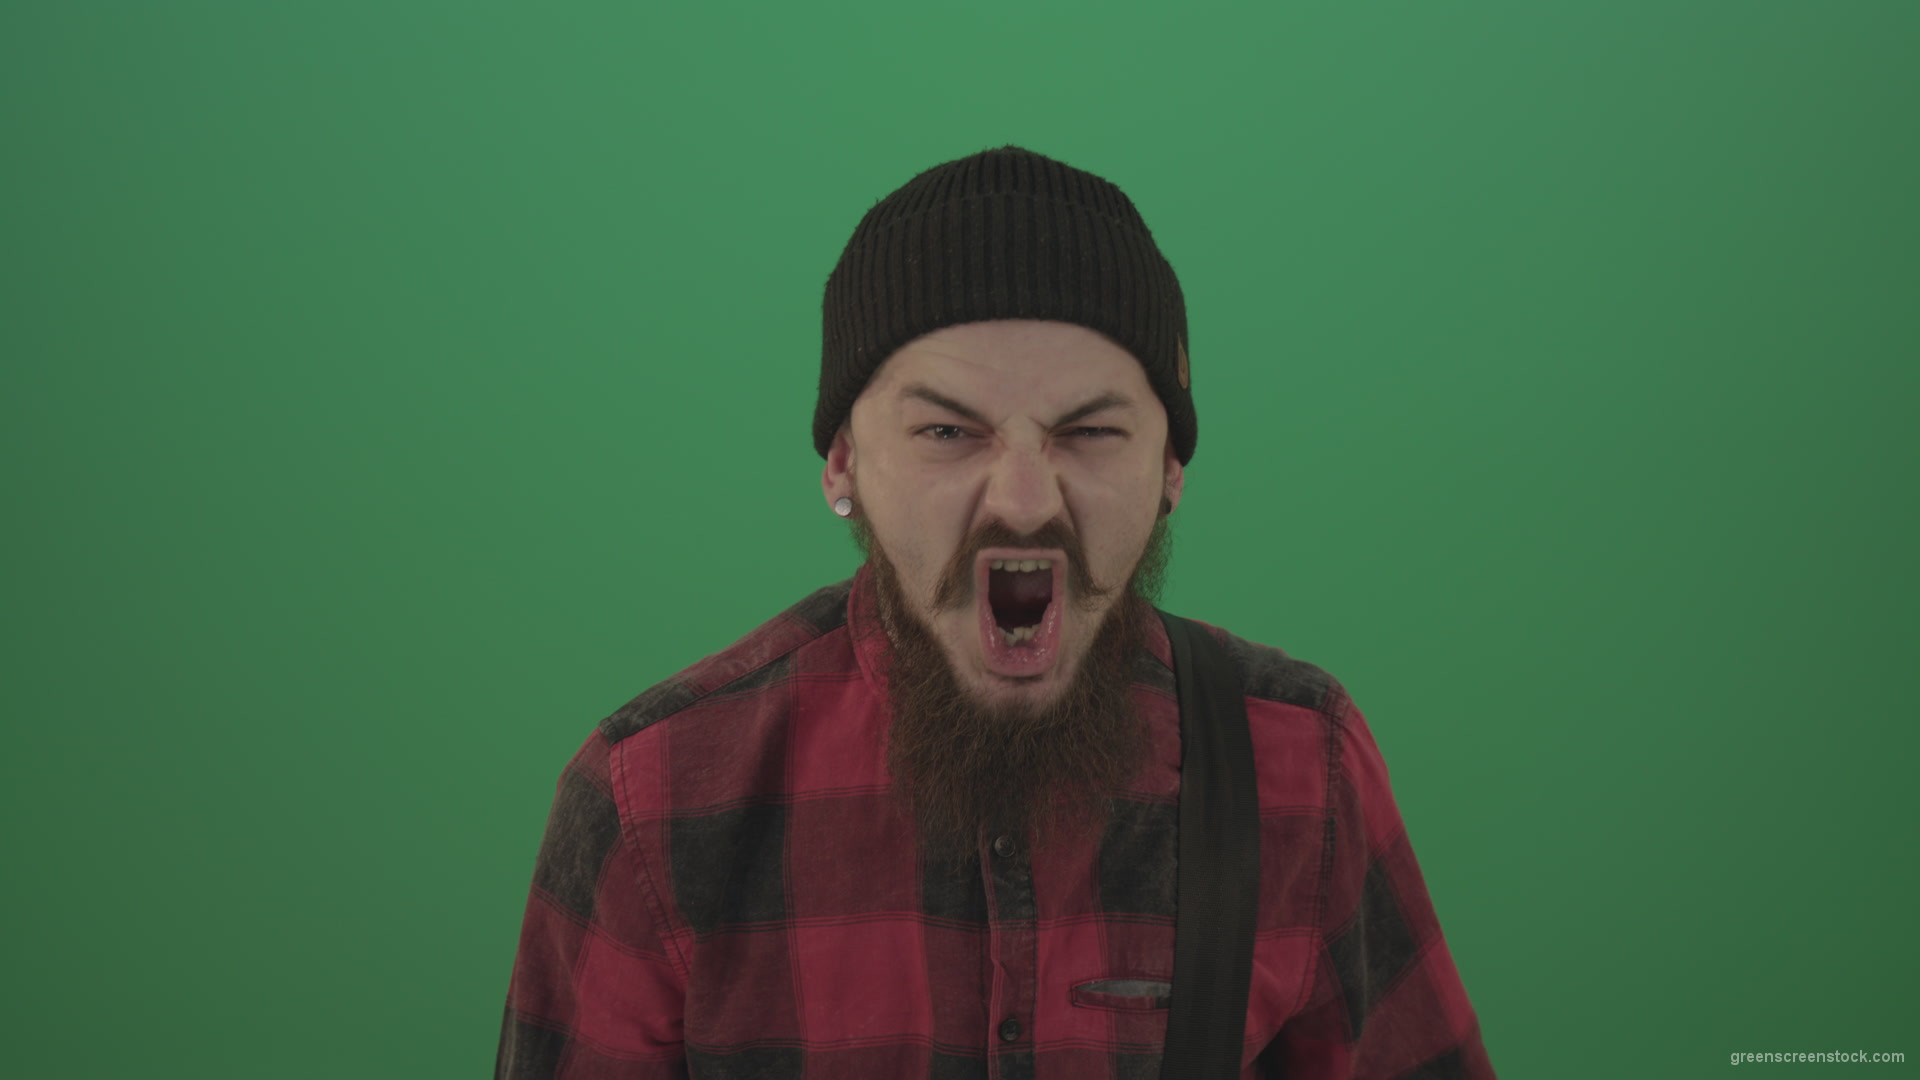 Punk-rocker-man-with-beard-and-red-shirt-screaming-feels-pain-isolated-on-green-screen-background_007 Green Screen Stock